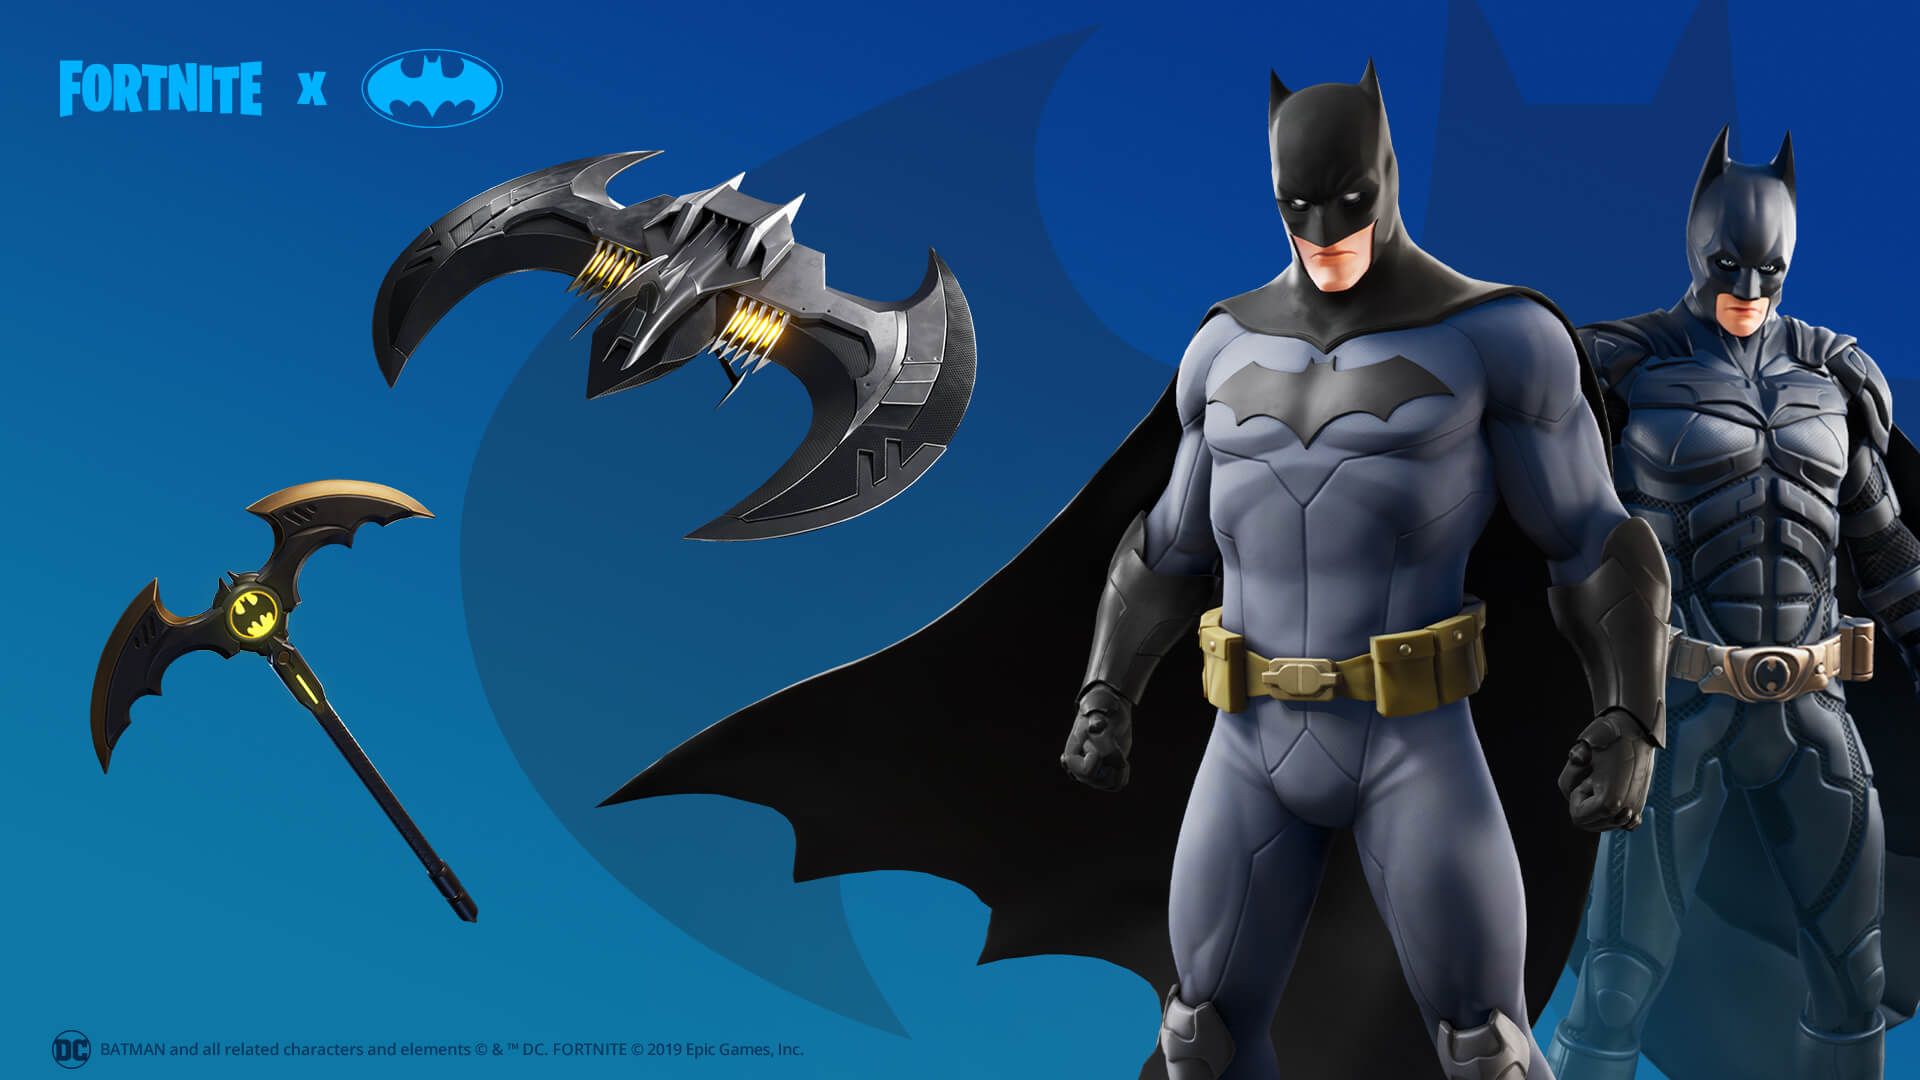 Fortnite x Batman: New skins, challenges and more in latest crossover event